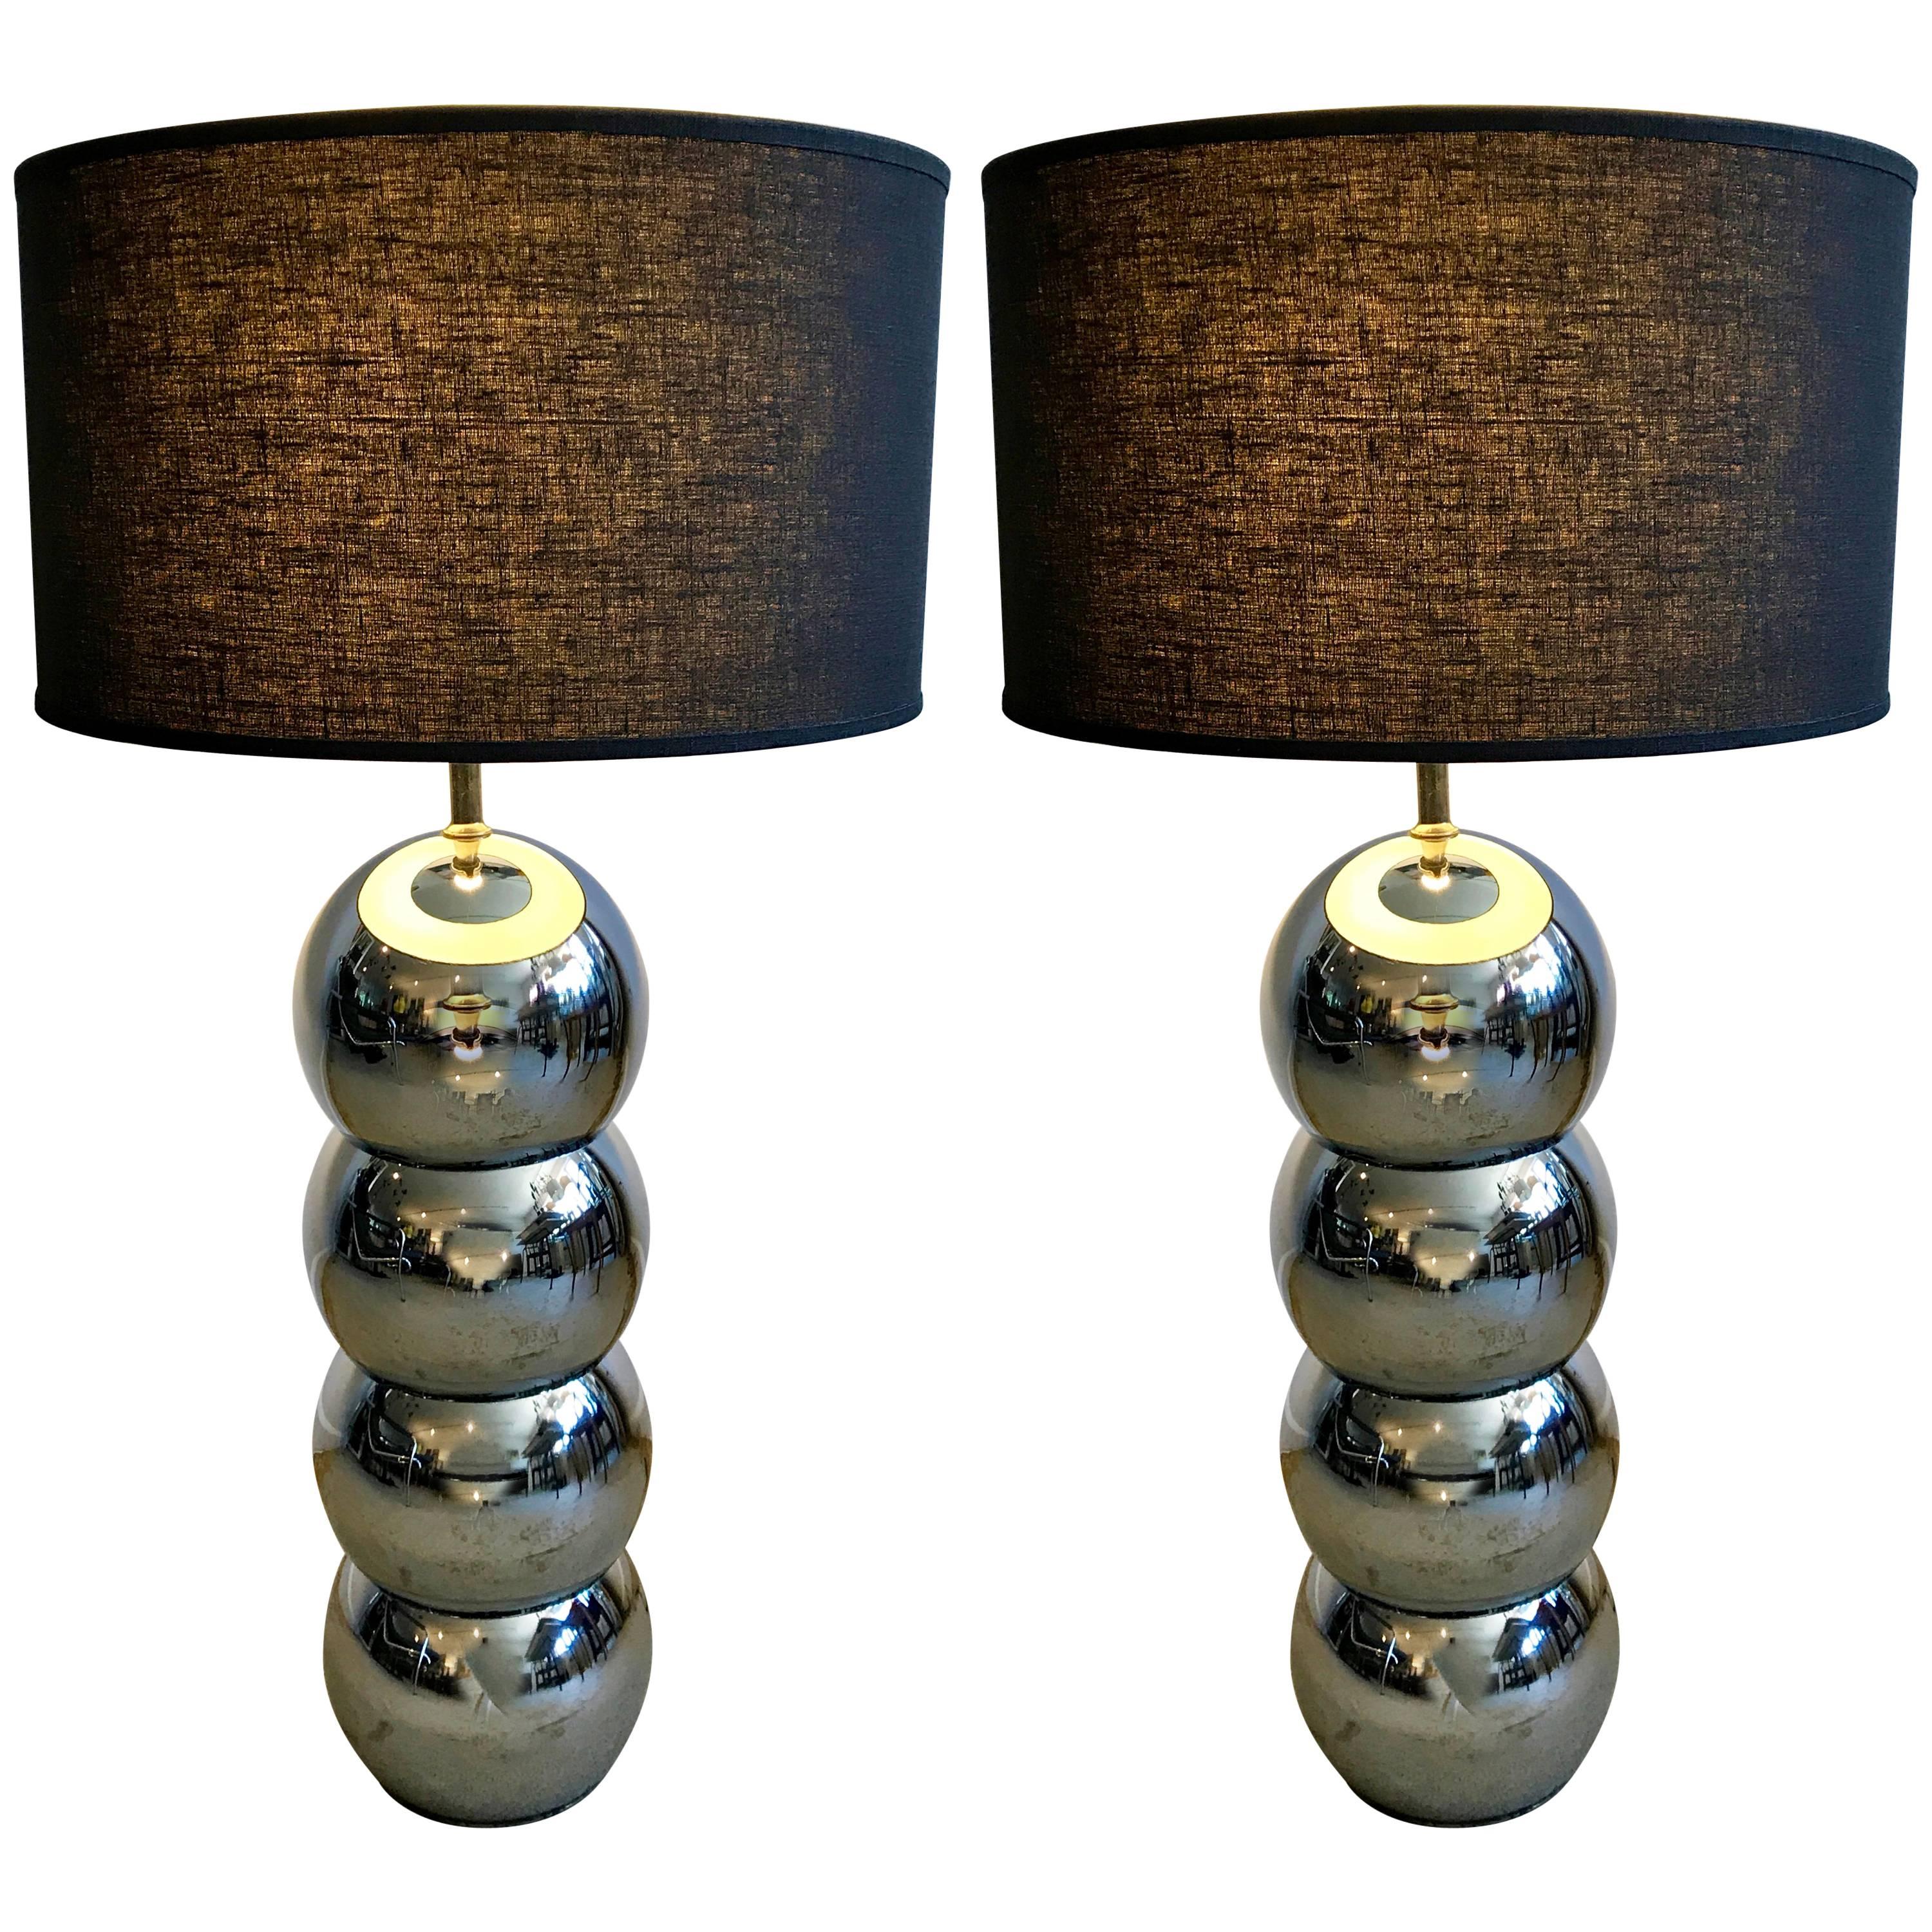 Pair of Chrome Stacked Ball Table Lamps by George Kovacs, 1970s